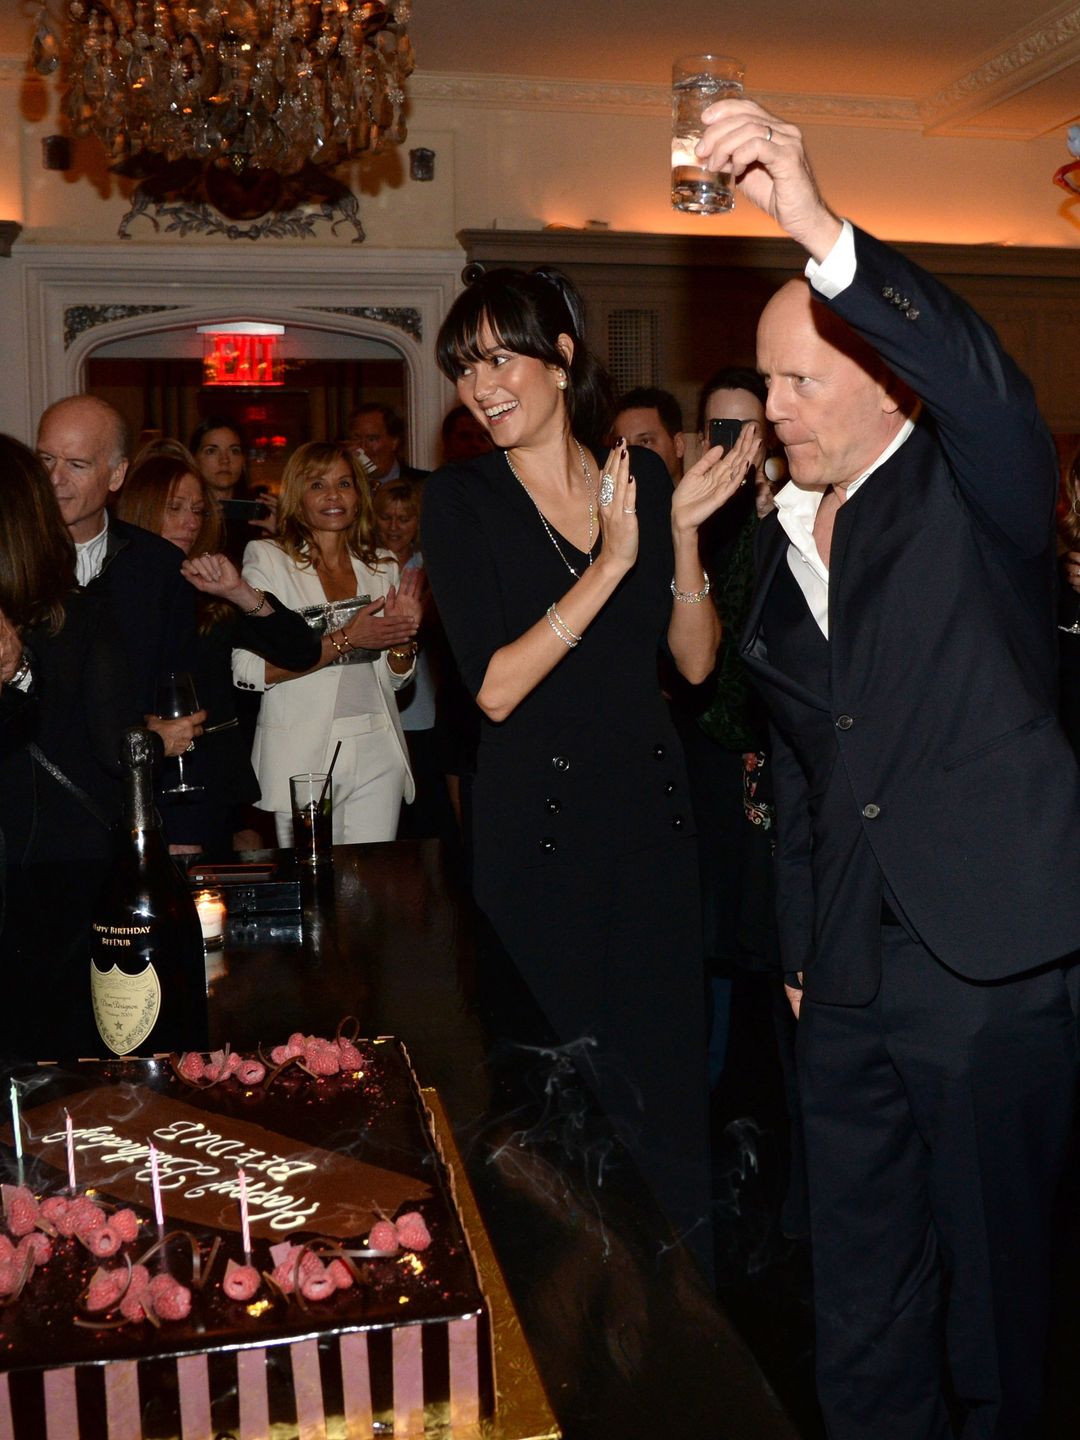 Bruce standing on the right holding up a glass, Emma clapping to his left and to both their left a birthday cake